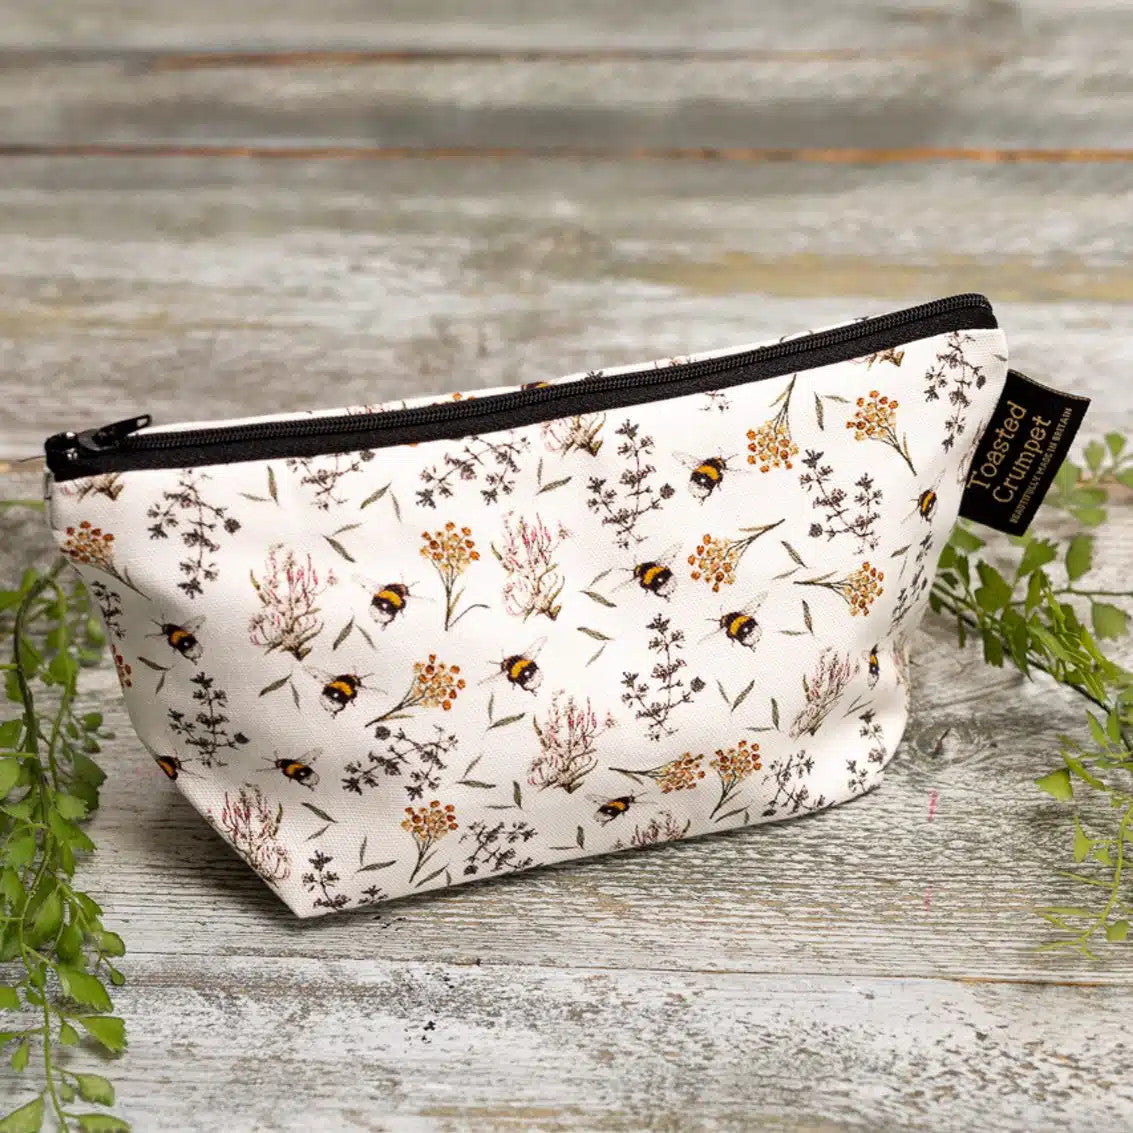 Bees & Honeysuckle Pure Makeup Bag by Toasted Crumpet.